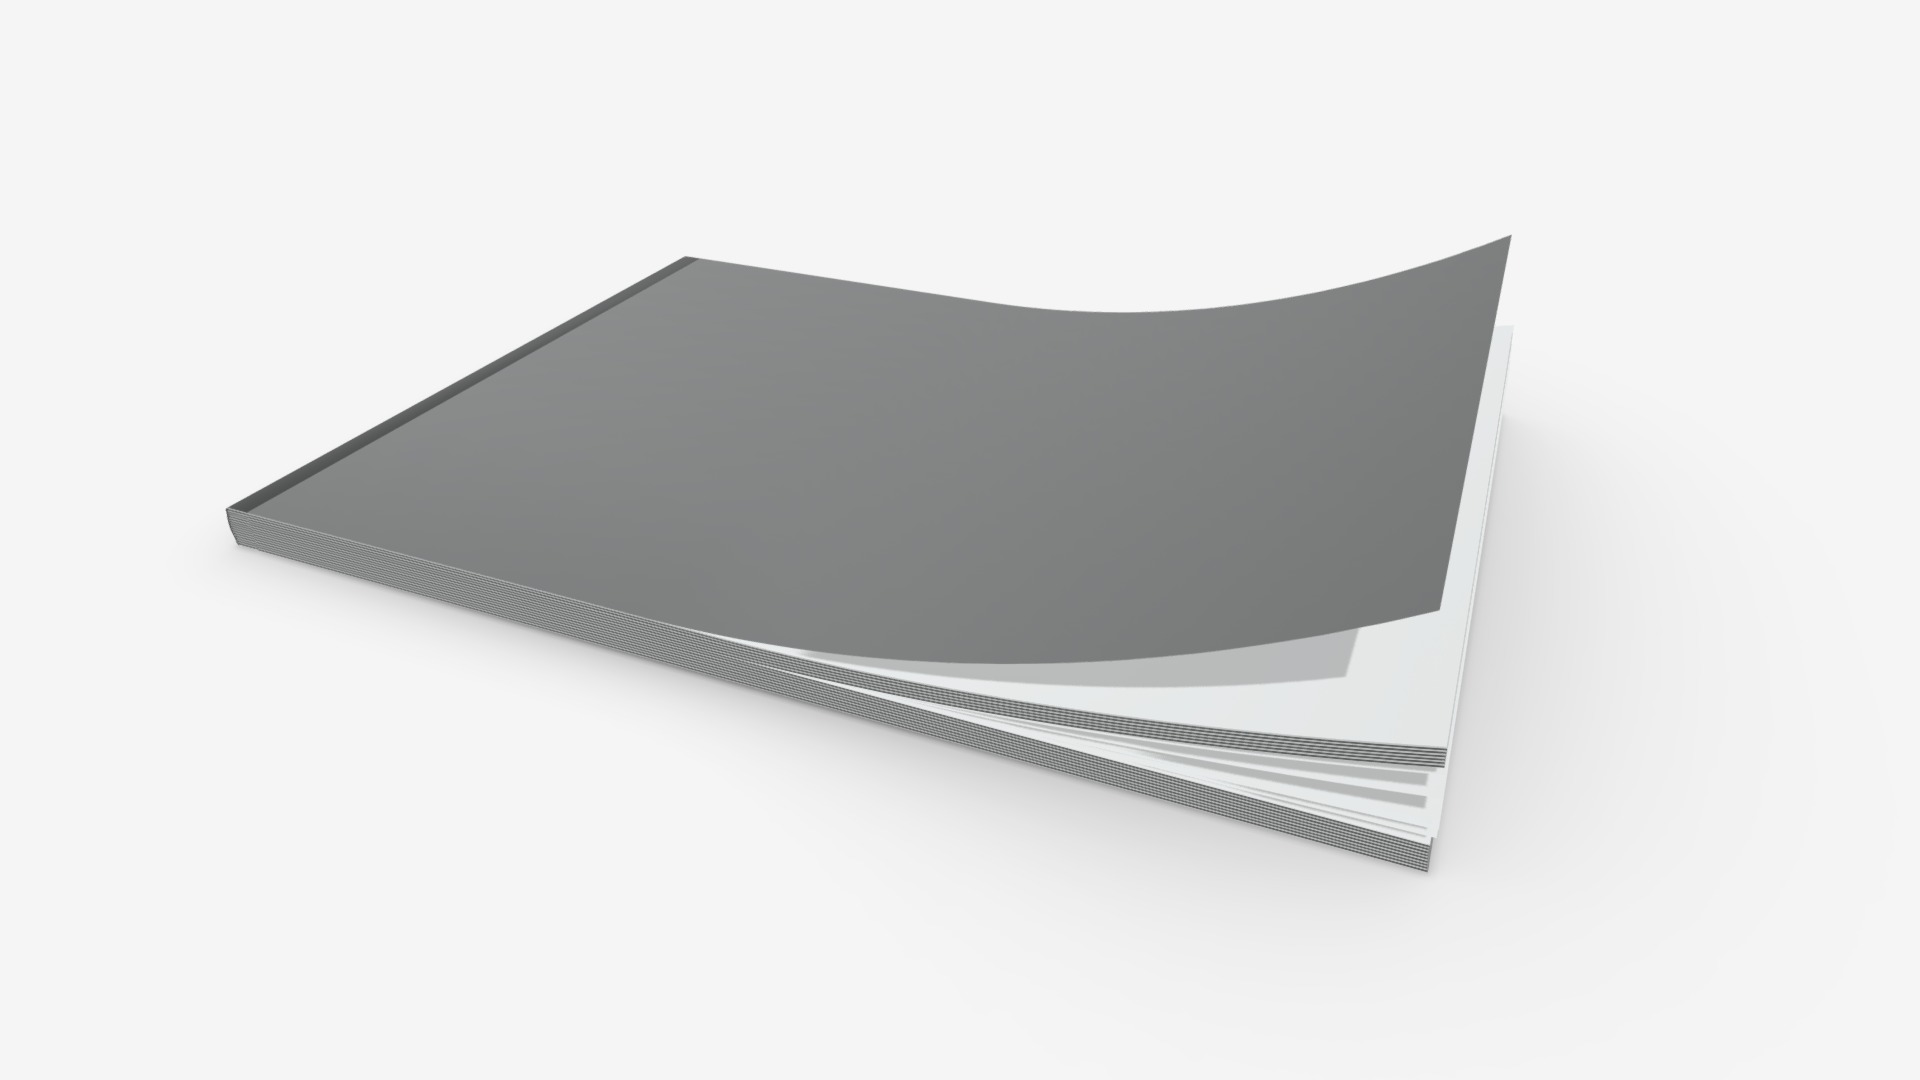 3D model brochure closed size A5 - This is a 3D model of the brochure closed size A5. The 3D model is about a black rectangular object.